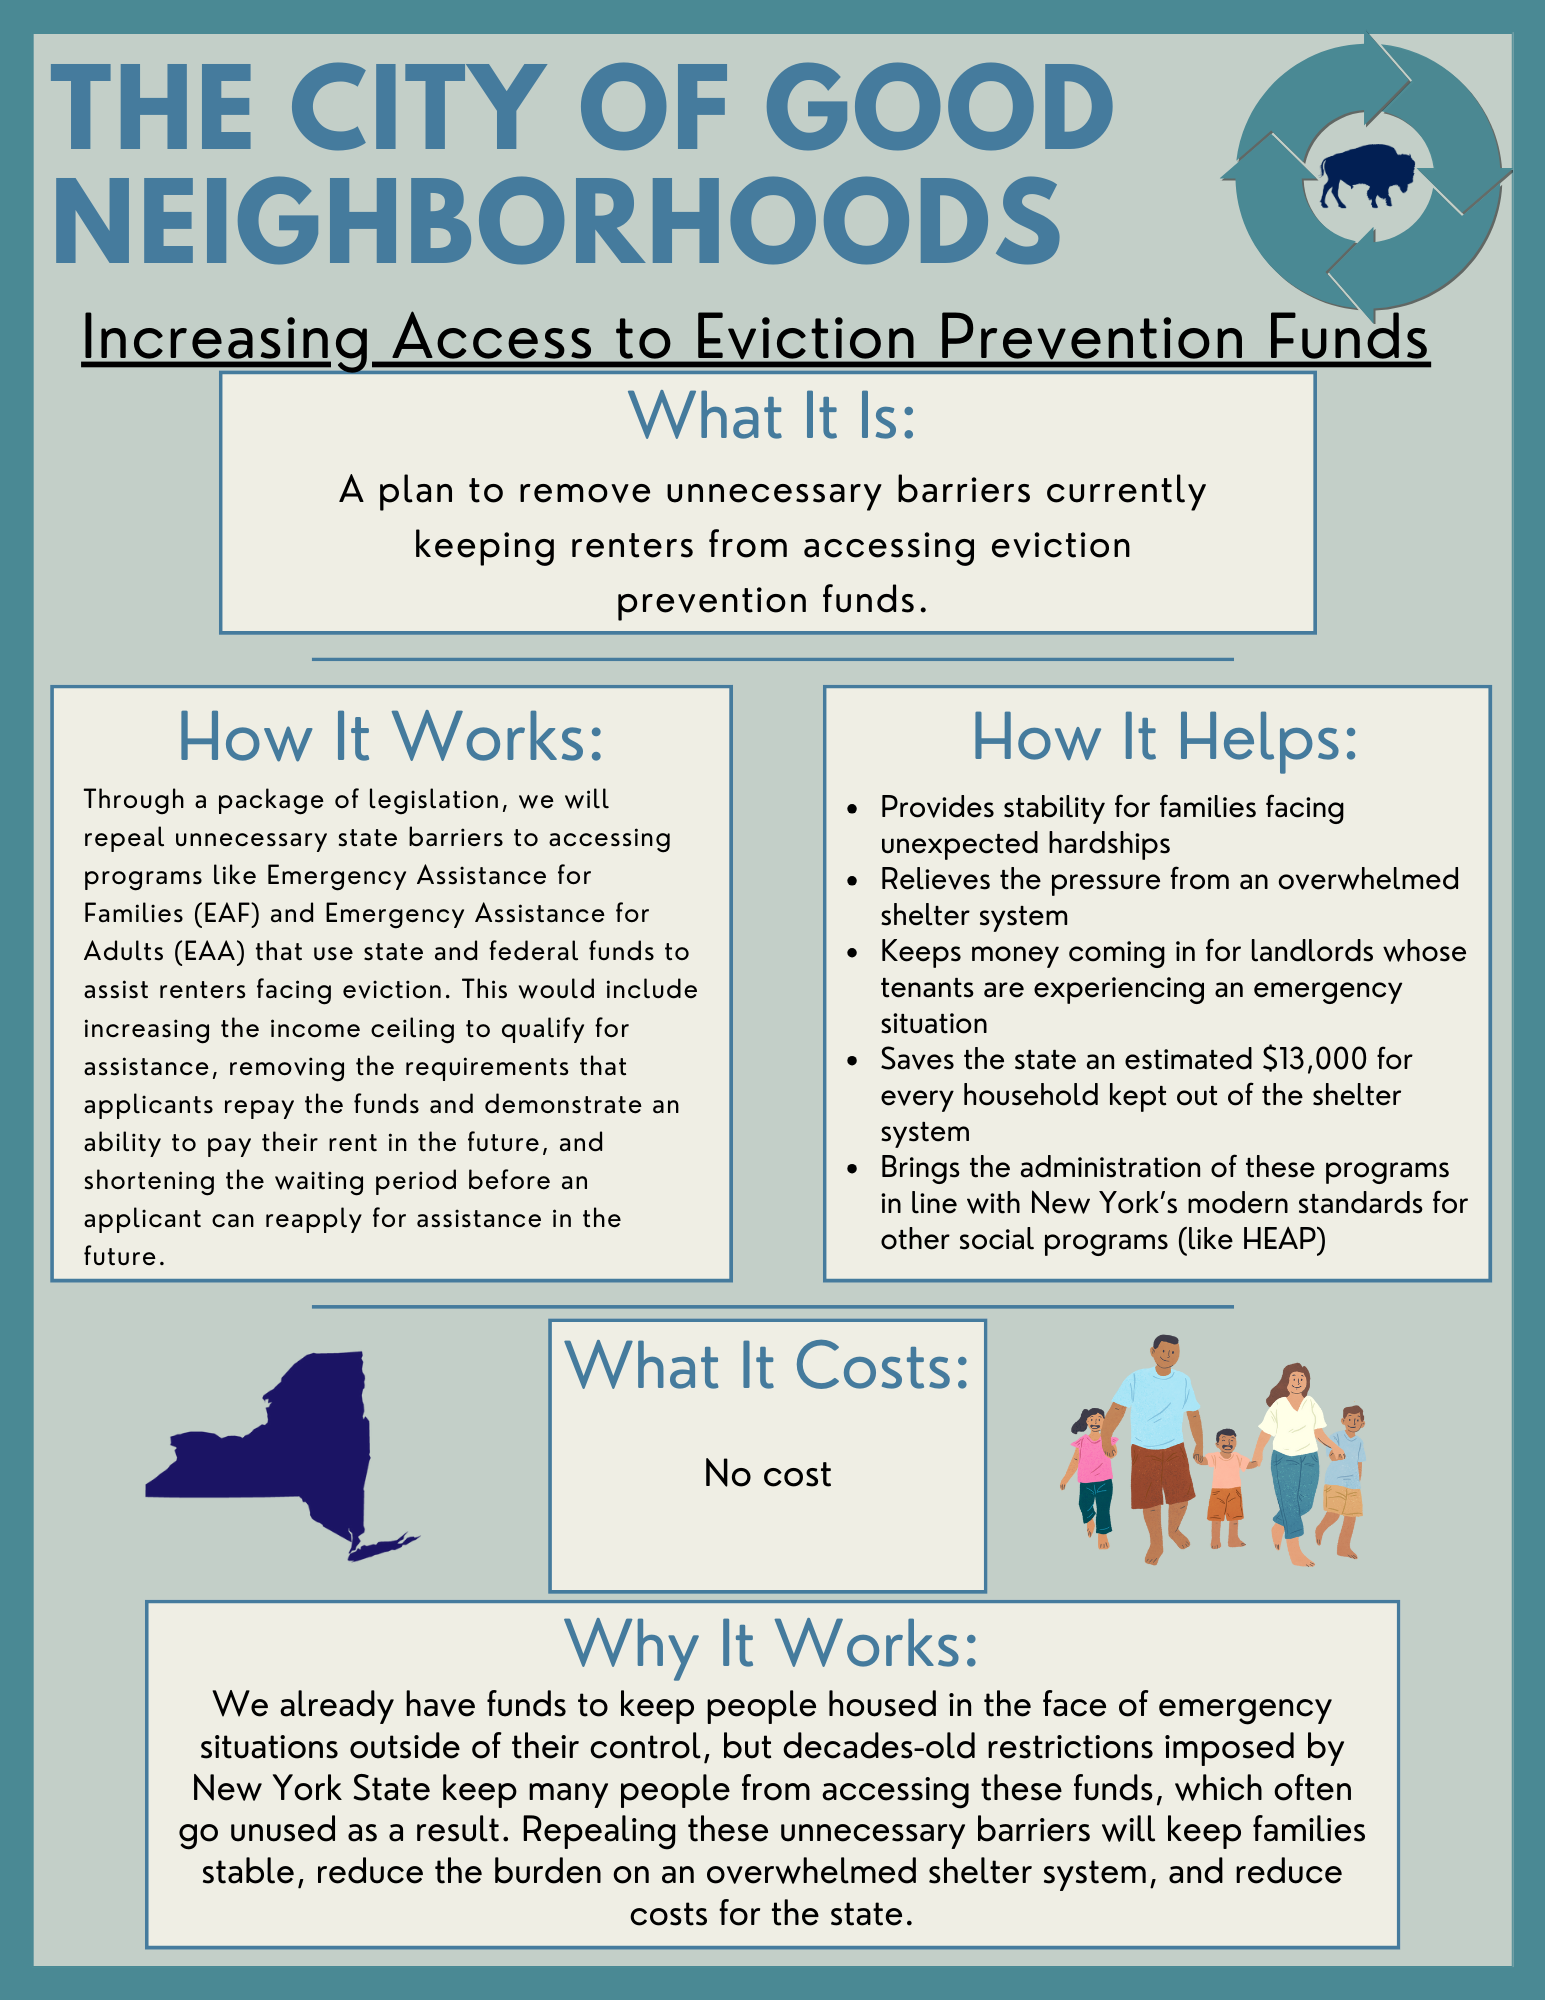 Increasing Access to Eviction Prevention Funds What It Is: A plan to remove unnecessary barriers currently keeping renters from accessing eviction prevention funds. How It Works: Through a package of legislation, we will repeal unnecessary state barriers to accessing programs like Emergency Assistance for Families (EAF) and Emergency Assistance for Adults (EAA) that use state and federal funds to assist renters facing eviction. This would include increasing the income ceiling to qualify for assistance, removing the requirements that applicants repay the funds and demonstrate an ability to pay their rent in the future, and shortening the waiting period before an applicant can reapply for assistance in the future.  How It Helps: ● Provides stability for families facing unexpected hardships ● Relieves the pressure from an overwhelmed shelter system ● Keeps money coming in for landlords whose tenants are experiencing an emergency situation ● Saves the state an estimated $13,000 for every household kept out of the shelter system ● Brings the administration of these programs in line with New York’s modern standards for other social programs (like HEAP)  What It Costs: No Cost  Why It Works: We already have funds to keep people housed in the face of emergency situations outside of their control, but decades-old restrictions imposed by New York State keep many people from accessing these funds, which often go unused as a result. Repealing these unnecessary barriers will keep families  stable, reduce the burden on an overwhelmed shelter system, and reduce costs for the state.